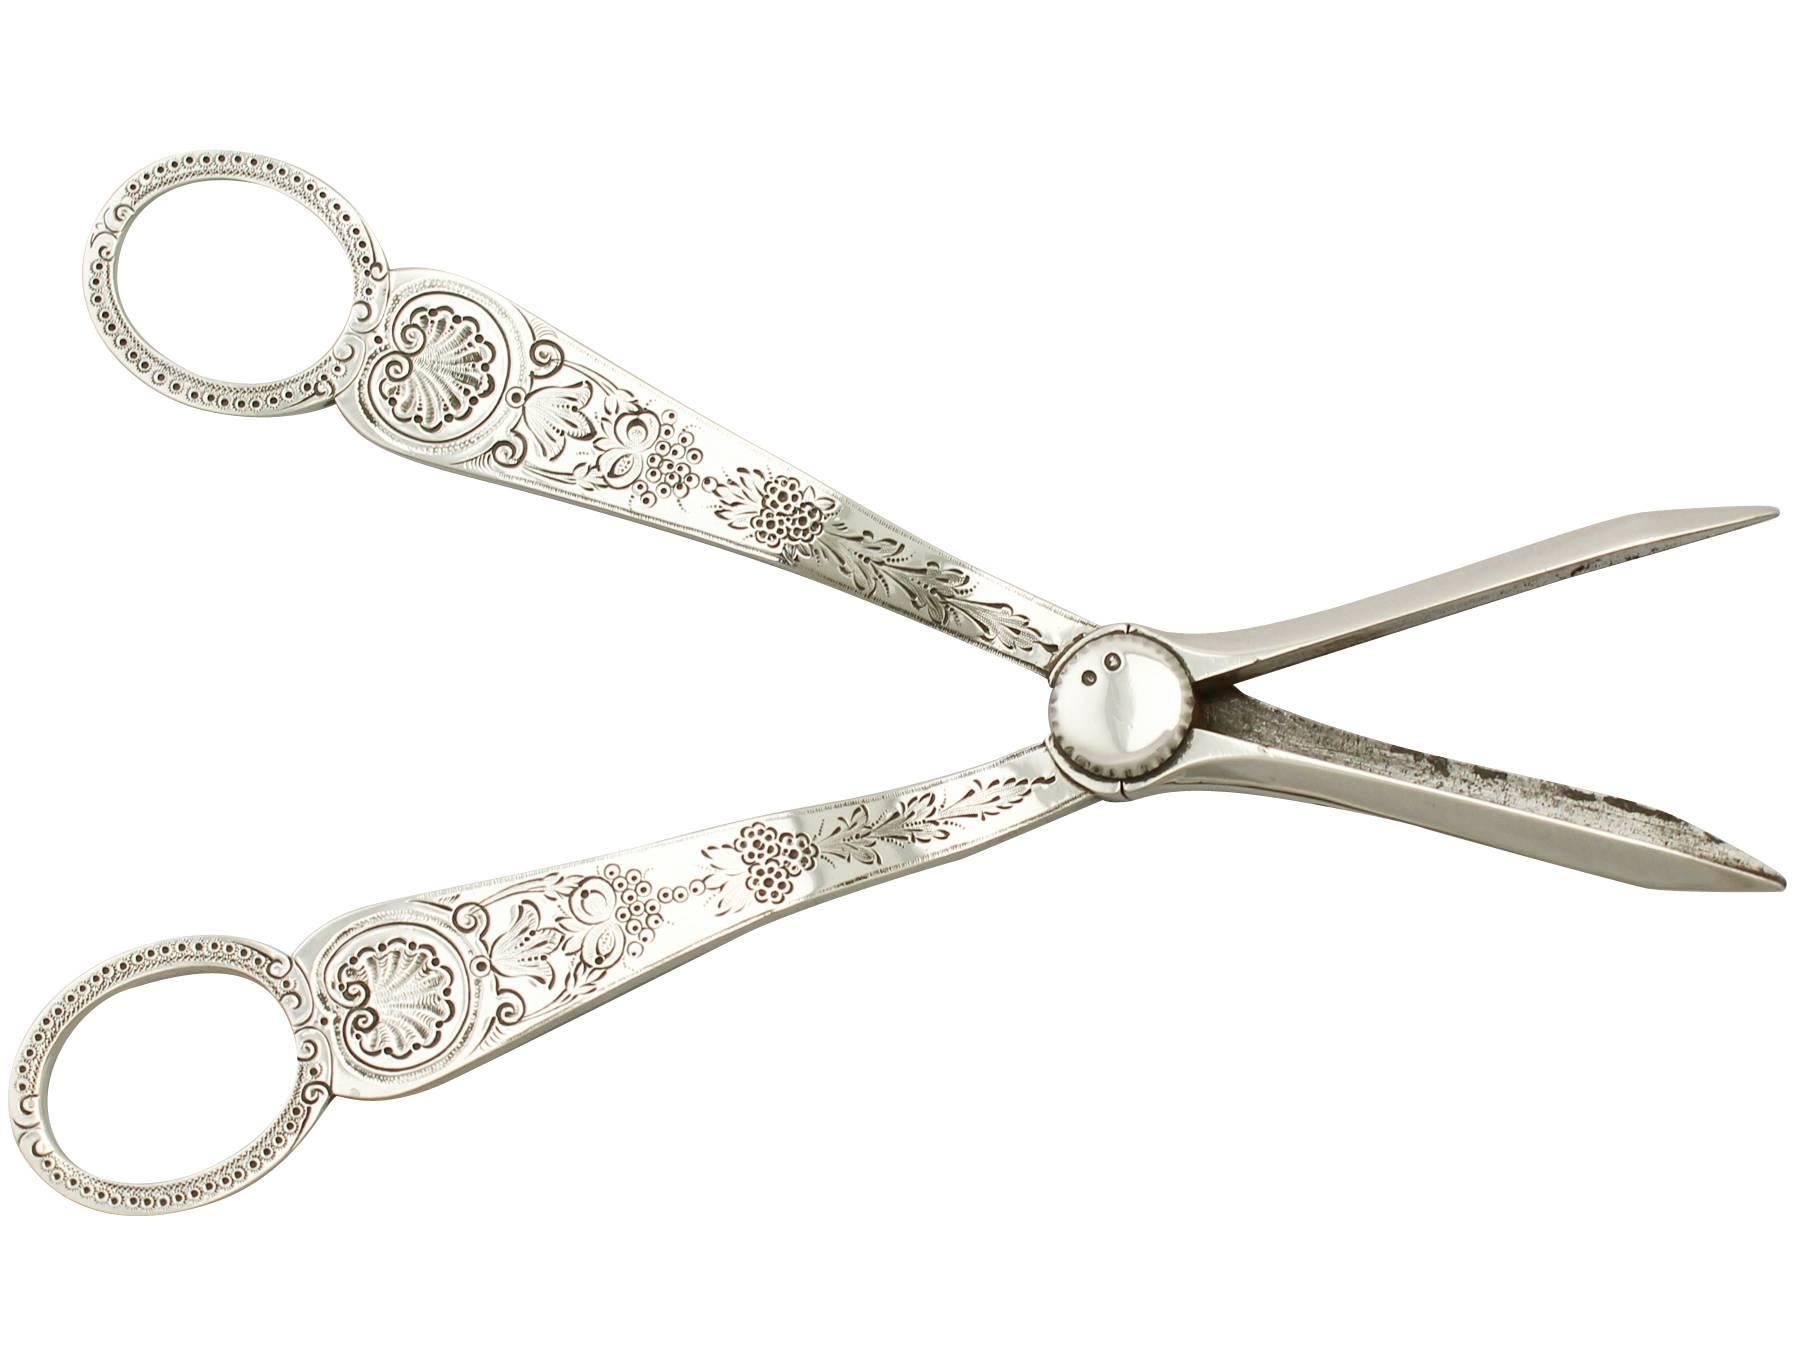 Late 19th Century Sterling Silver Grape Shears, Antique Victorian